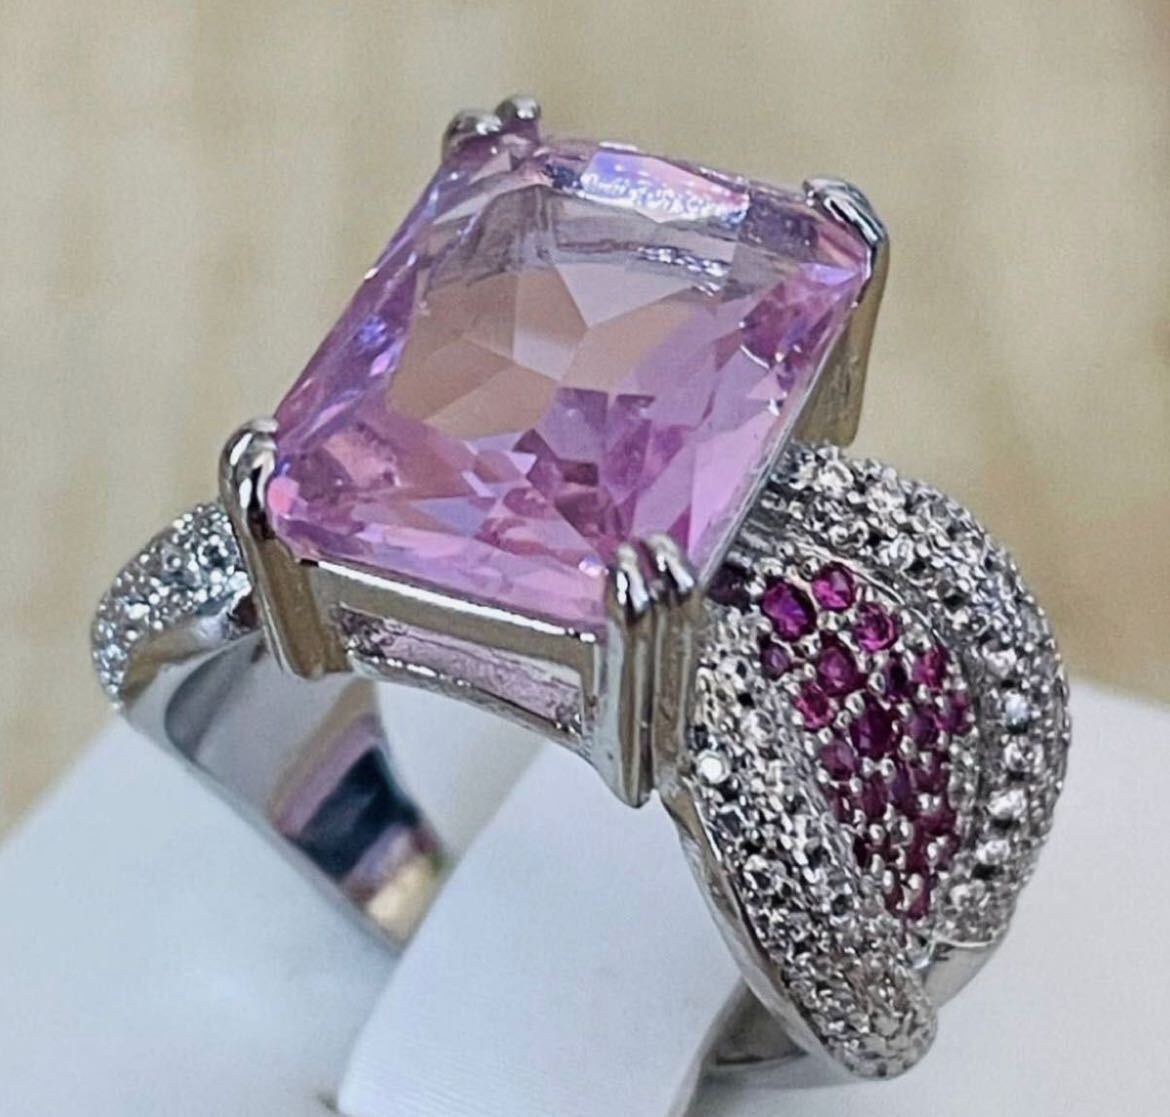 * anonymity delivery * free shipping * pink diamond? Showa era ring Vintage ring antique 11.5 number 